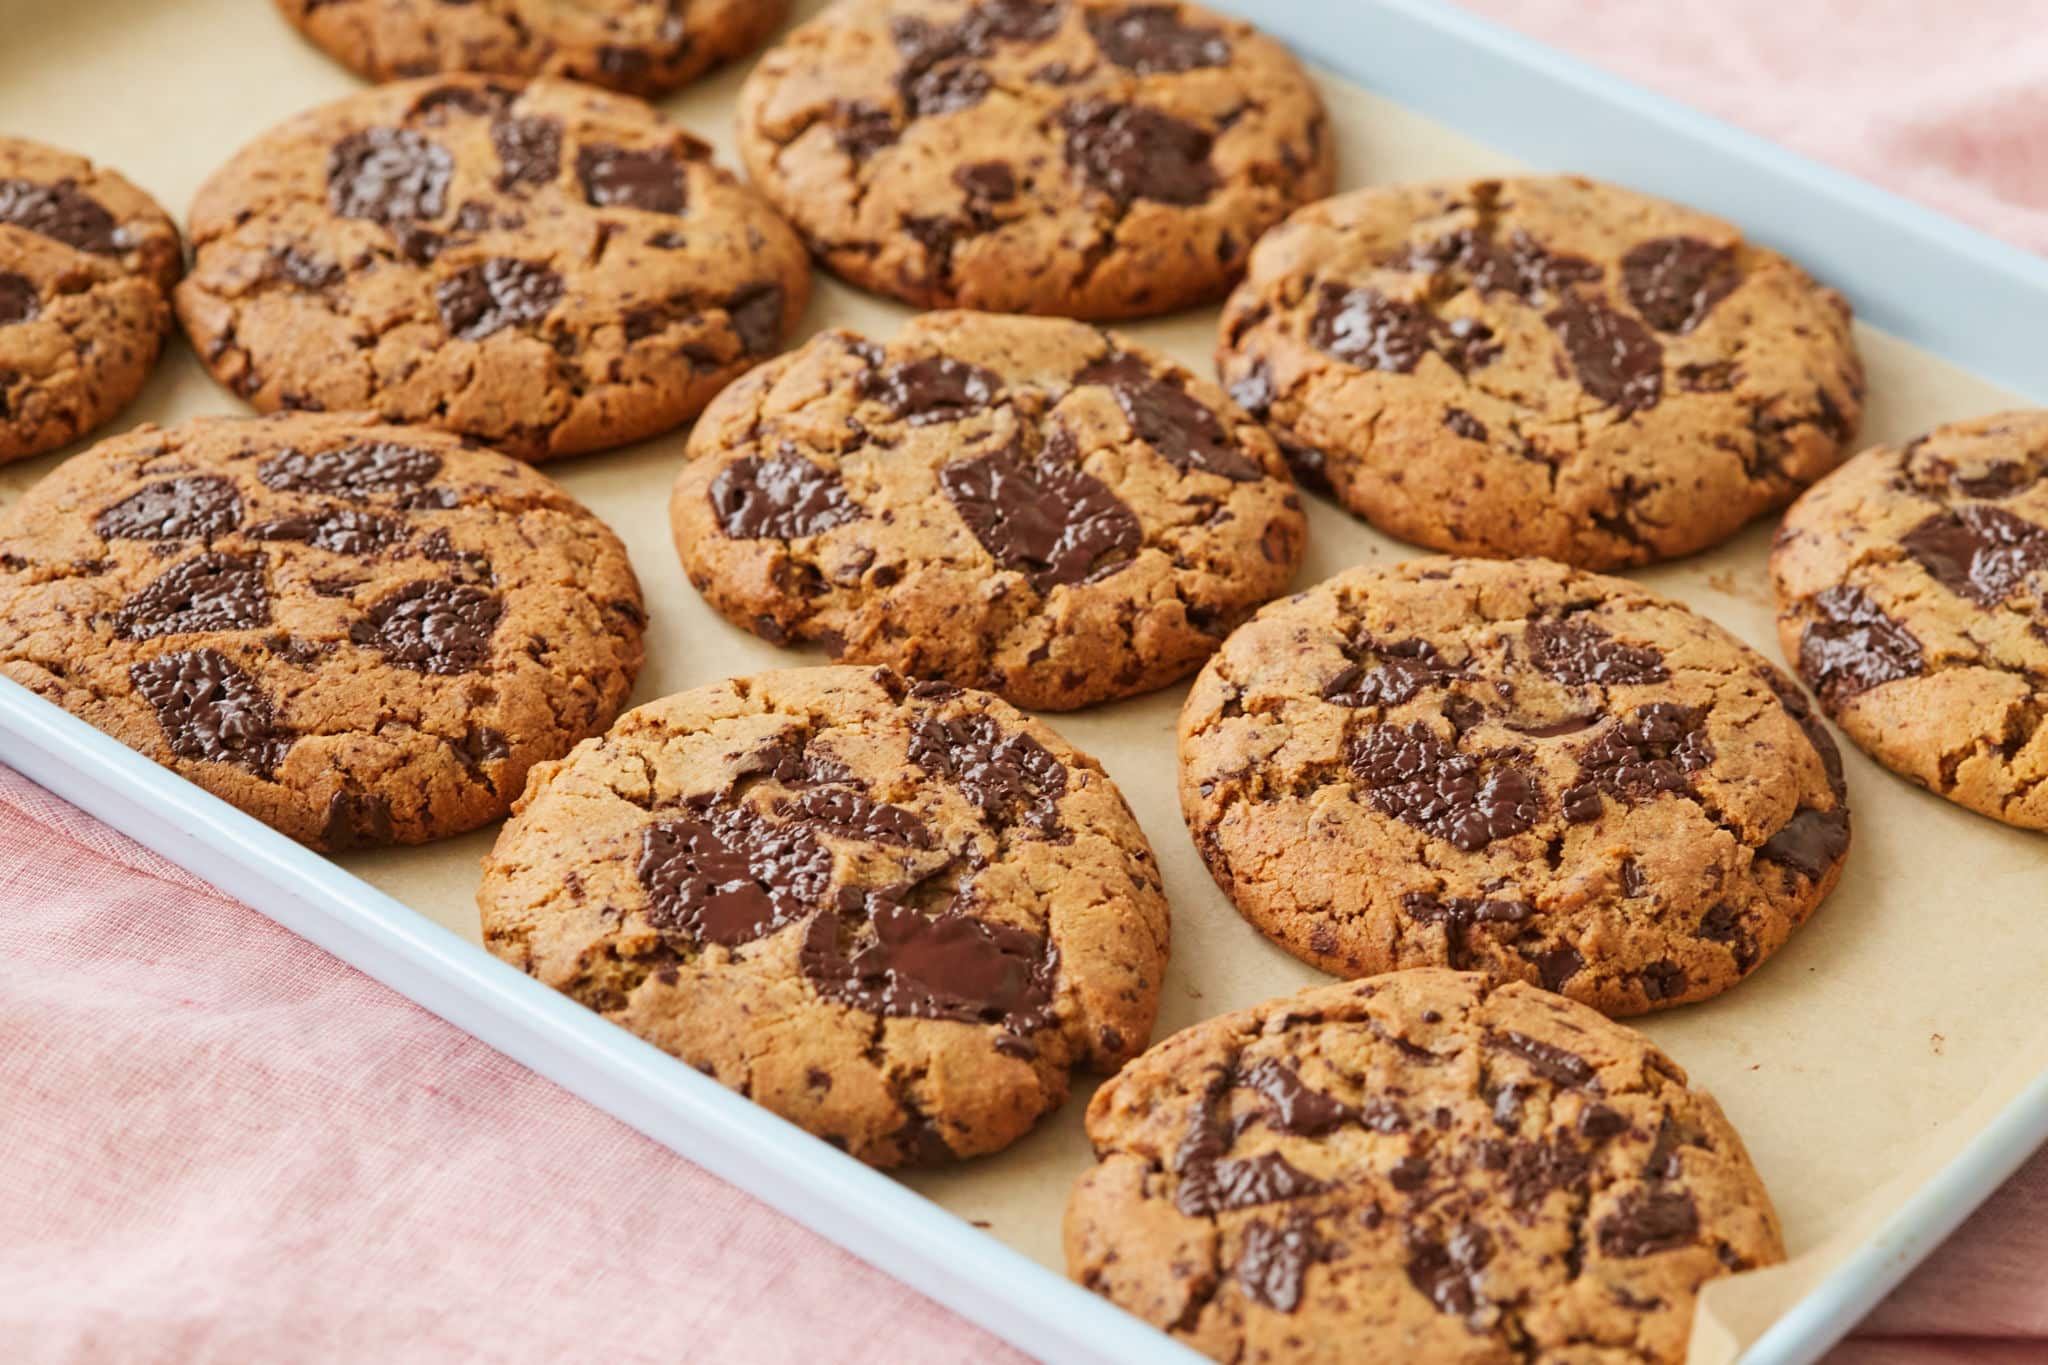 A tray of Chocolate Peanut Butter Cookies.